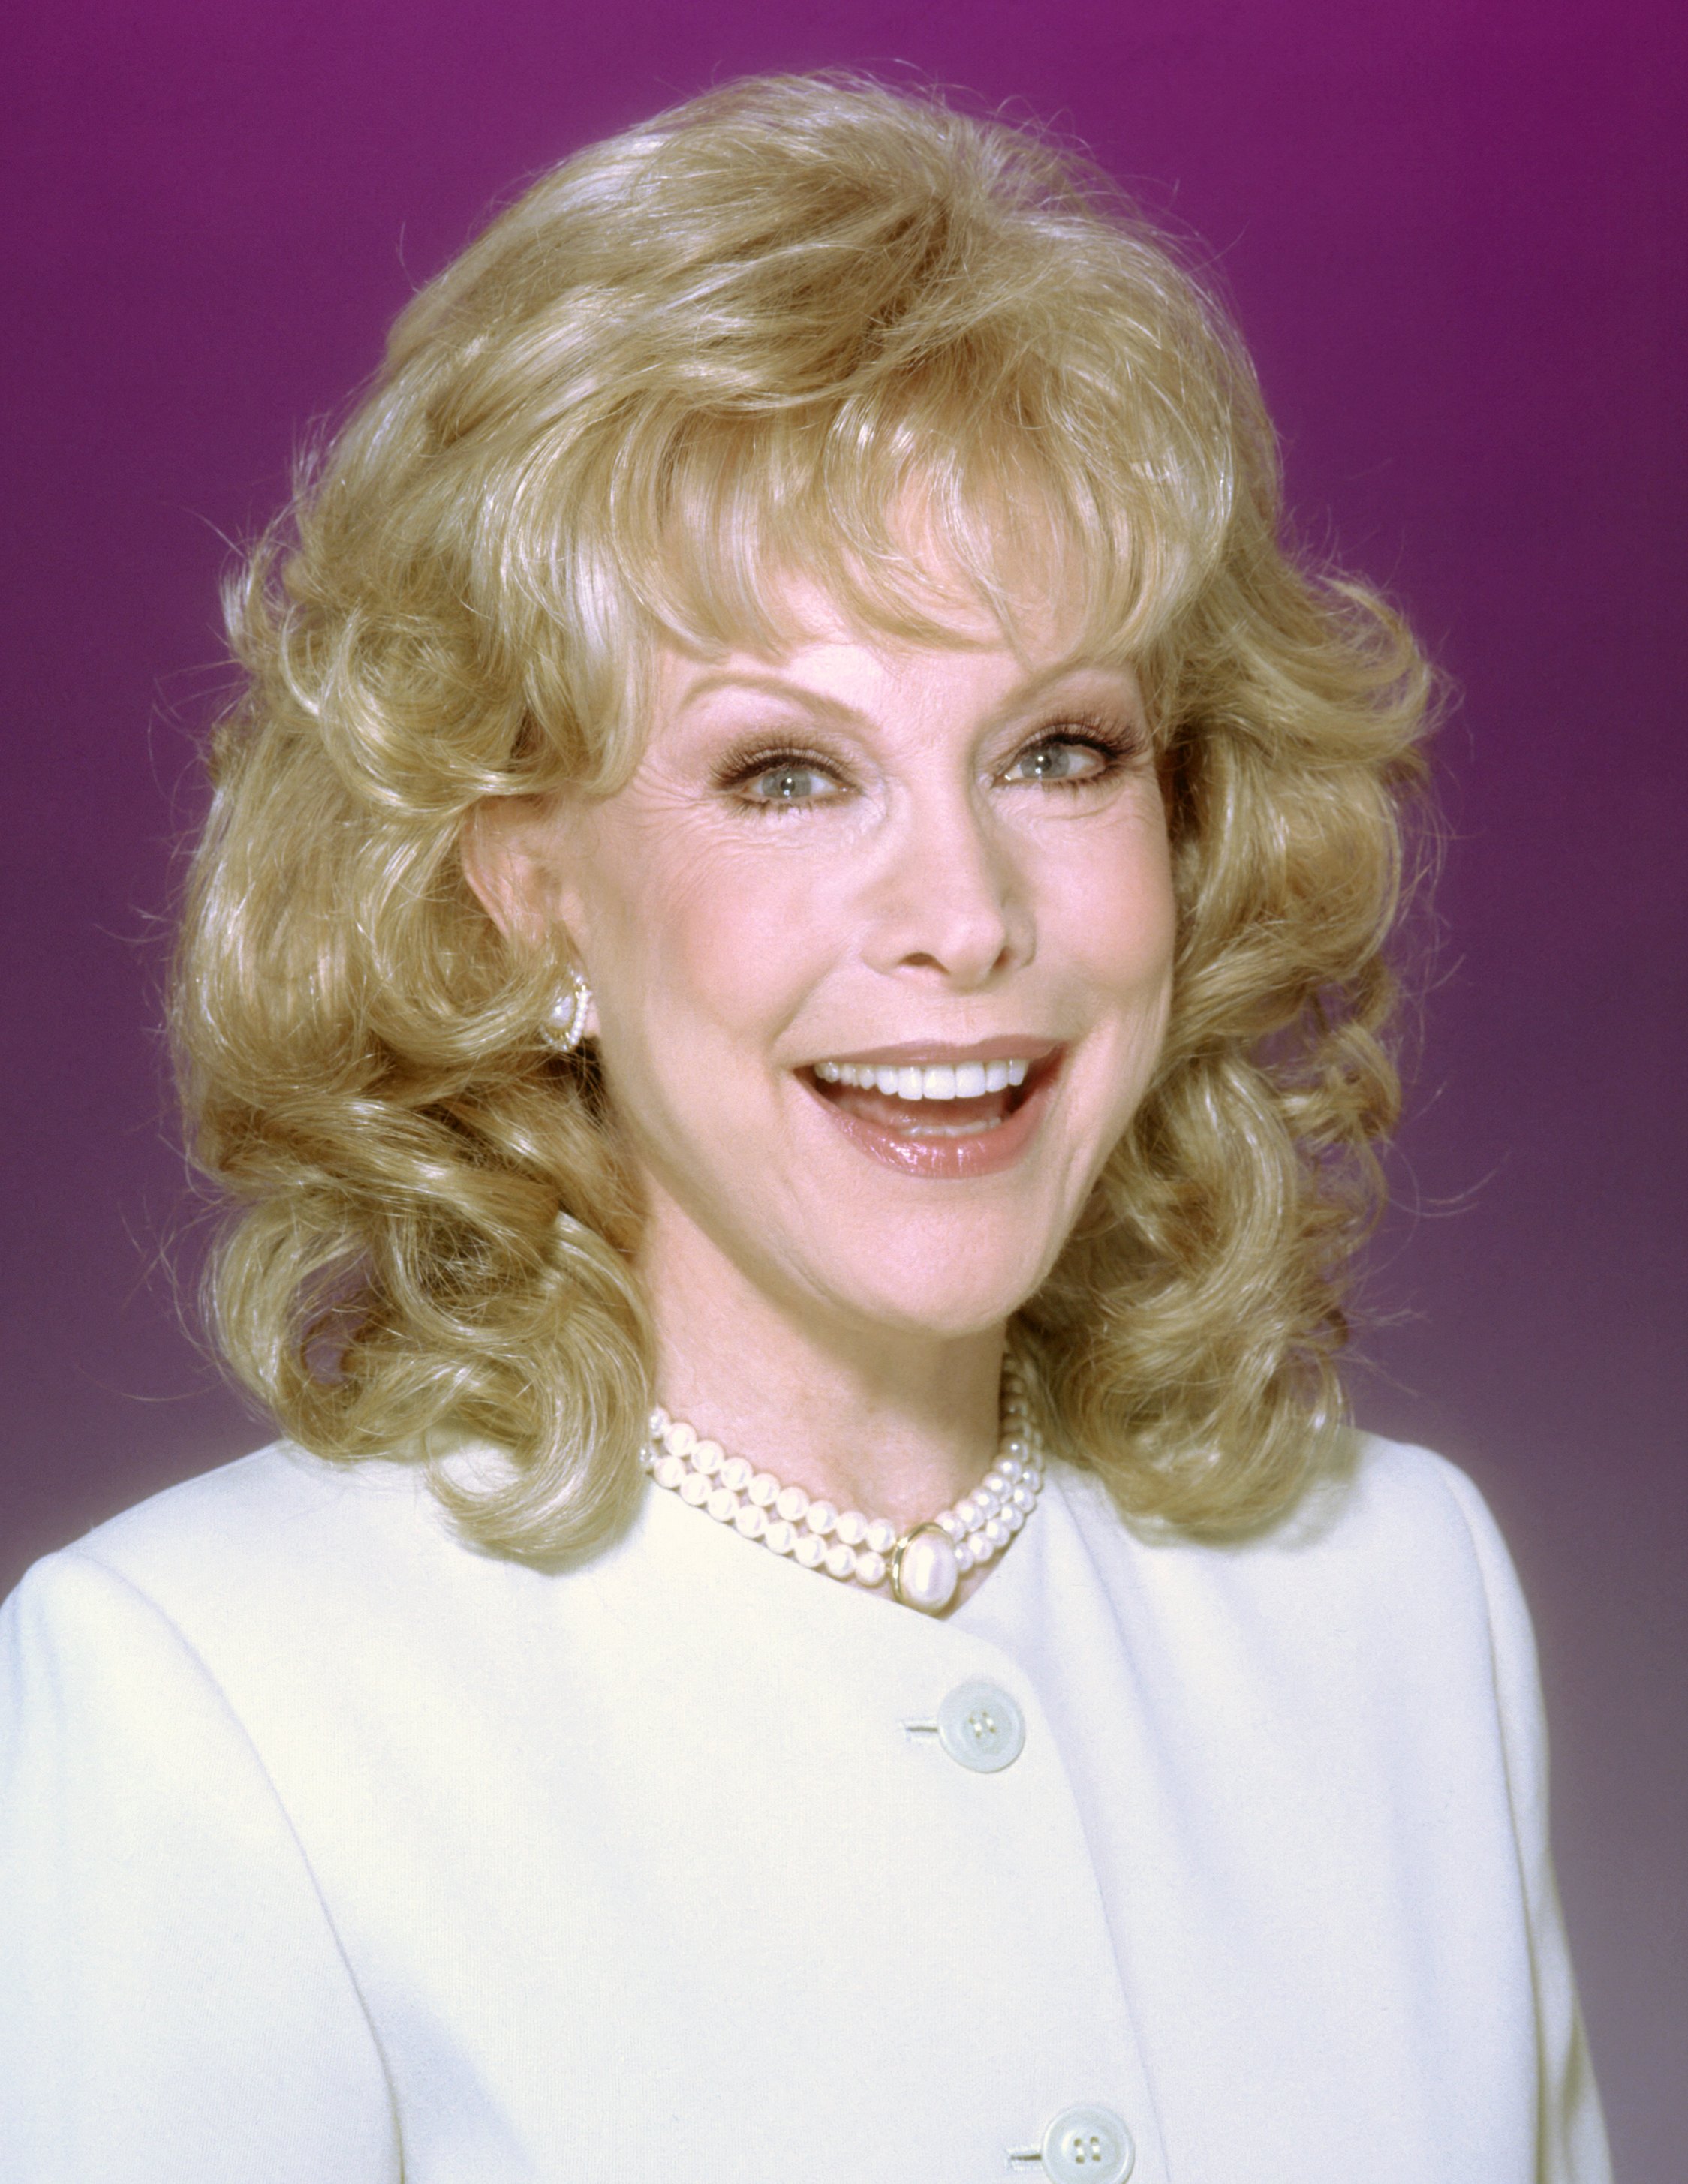 Barbara Eden poses for a portrait in 2000 in Los Angeles, California. | Source: Getty Images